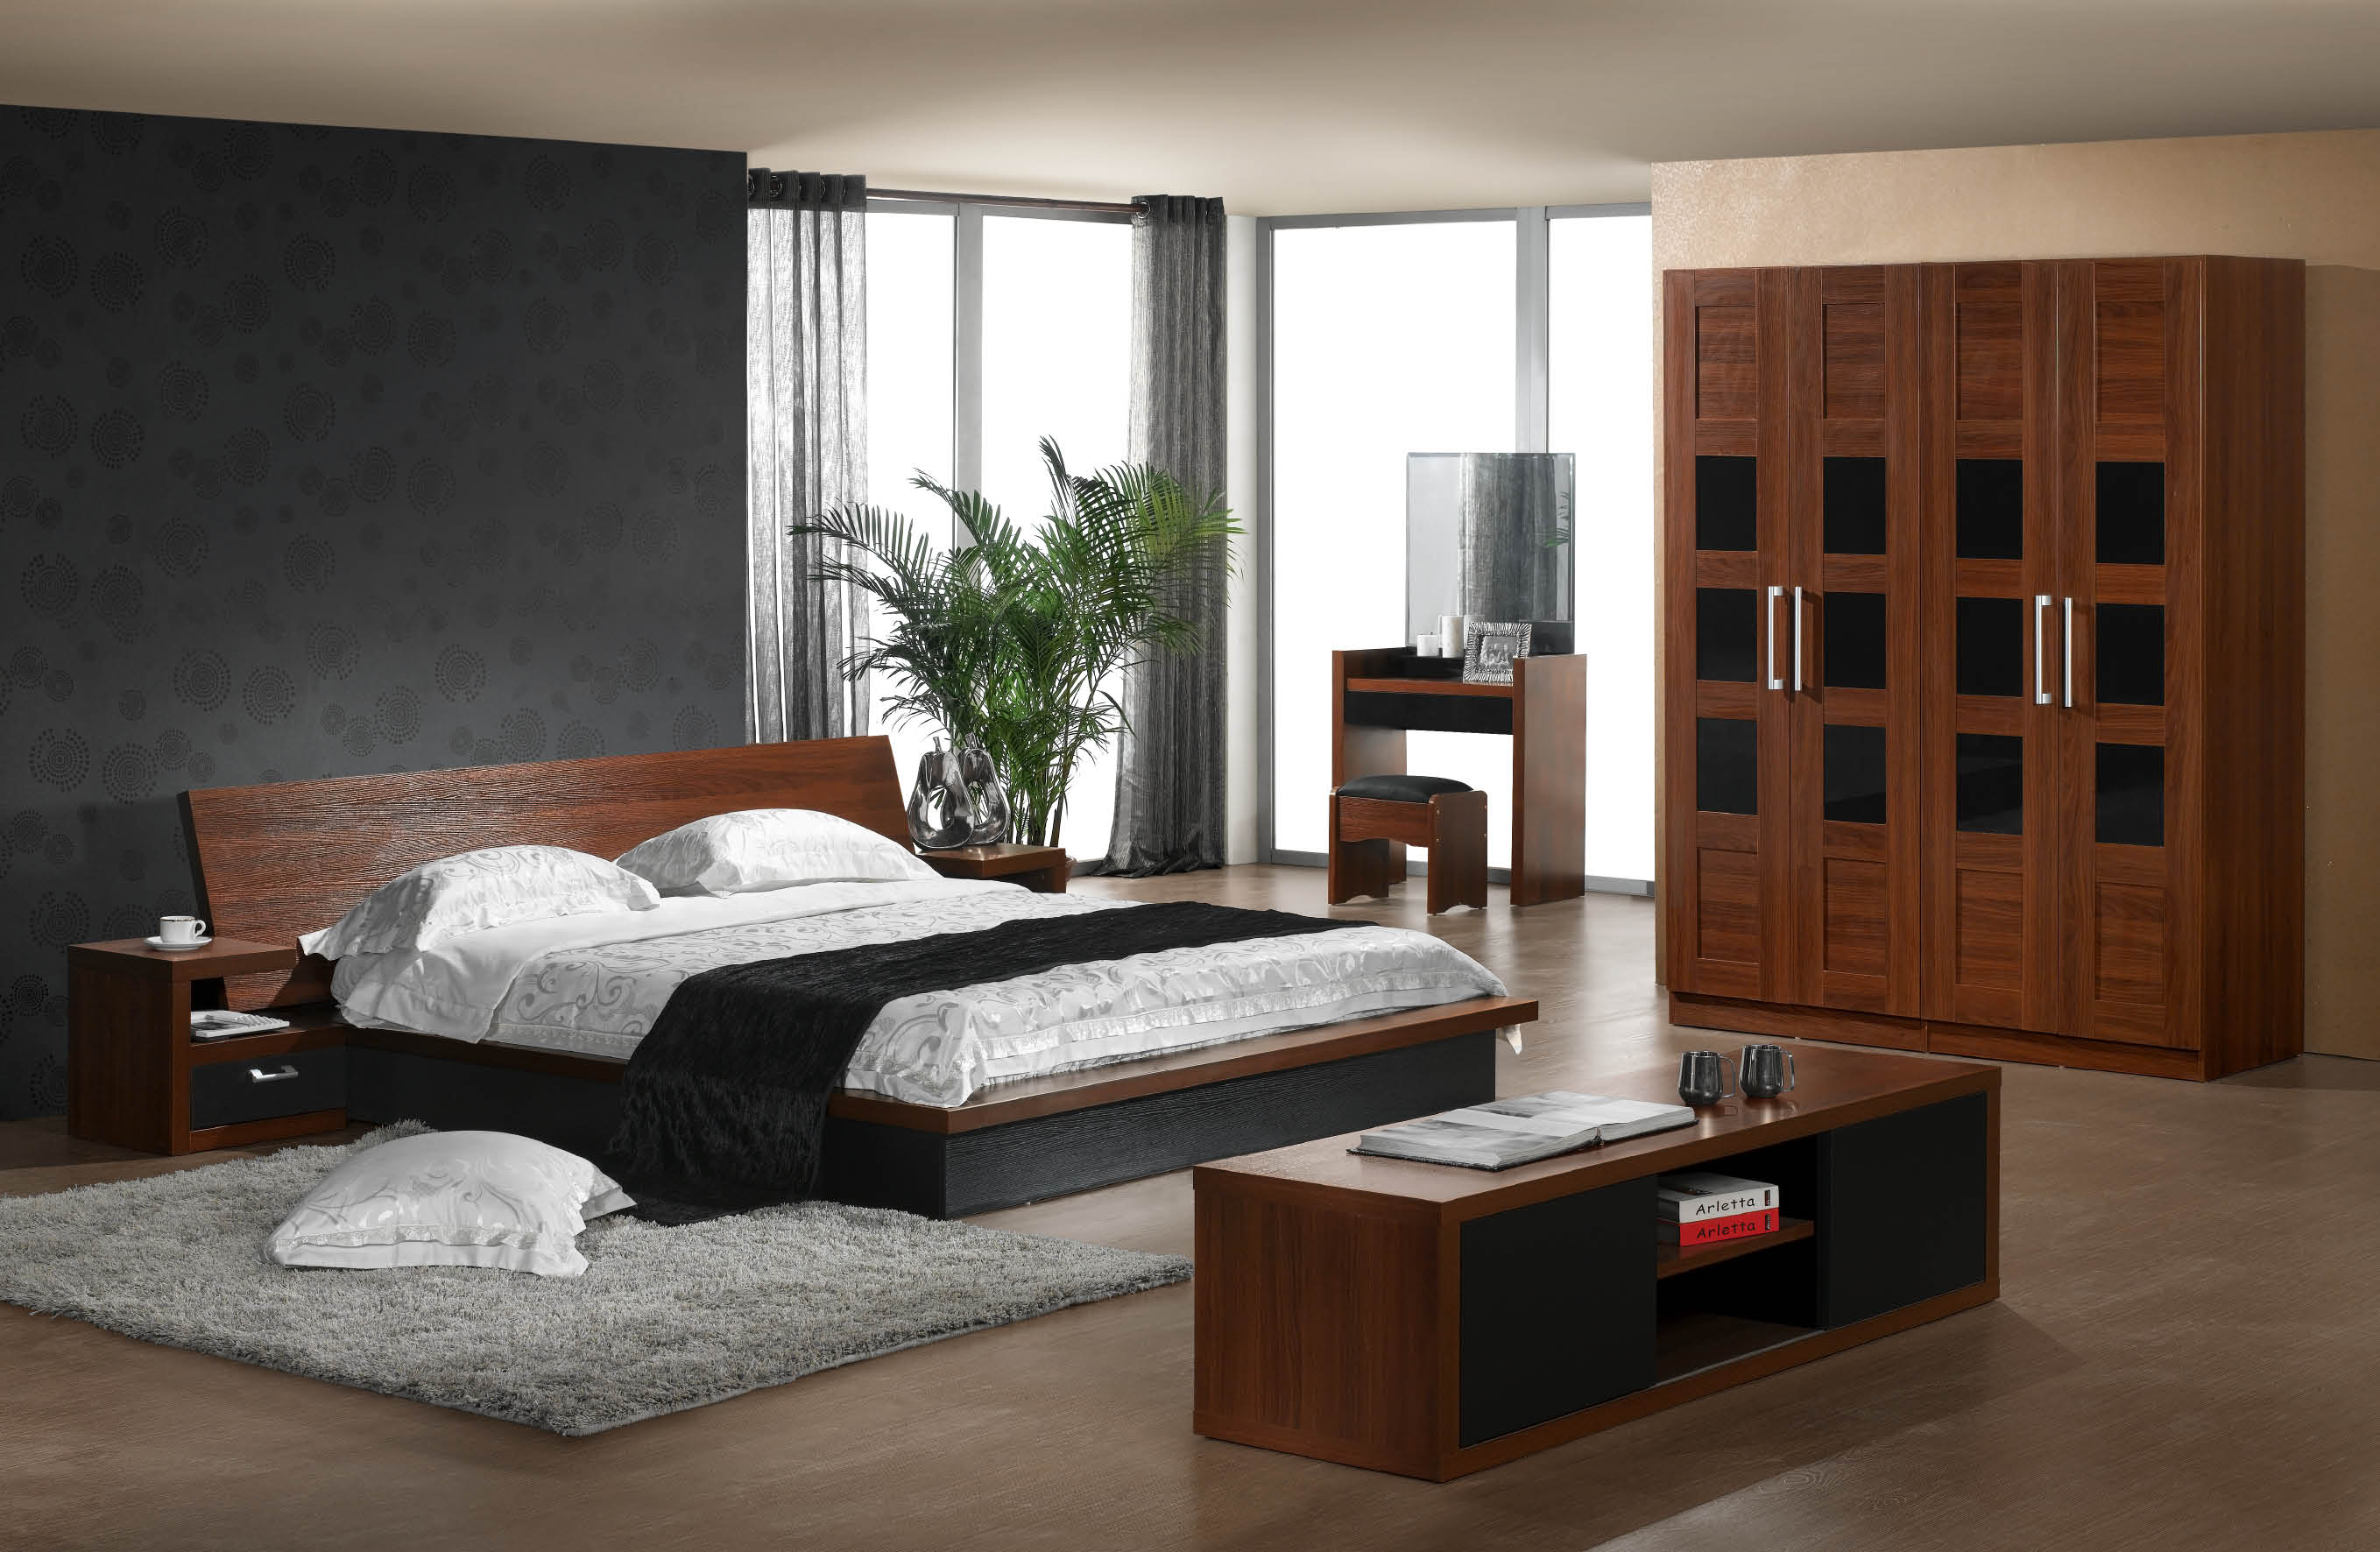 Foshan Customized Commercial Modern Complete Bed Room Furniture Luxury Bedroom Full Set UL_L603-